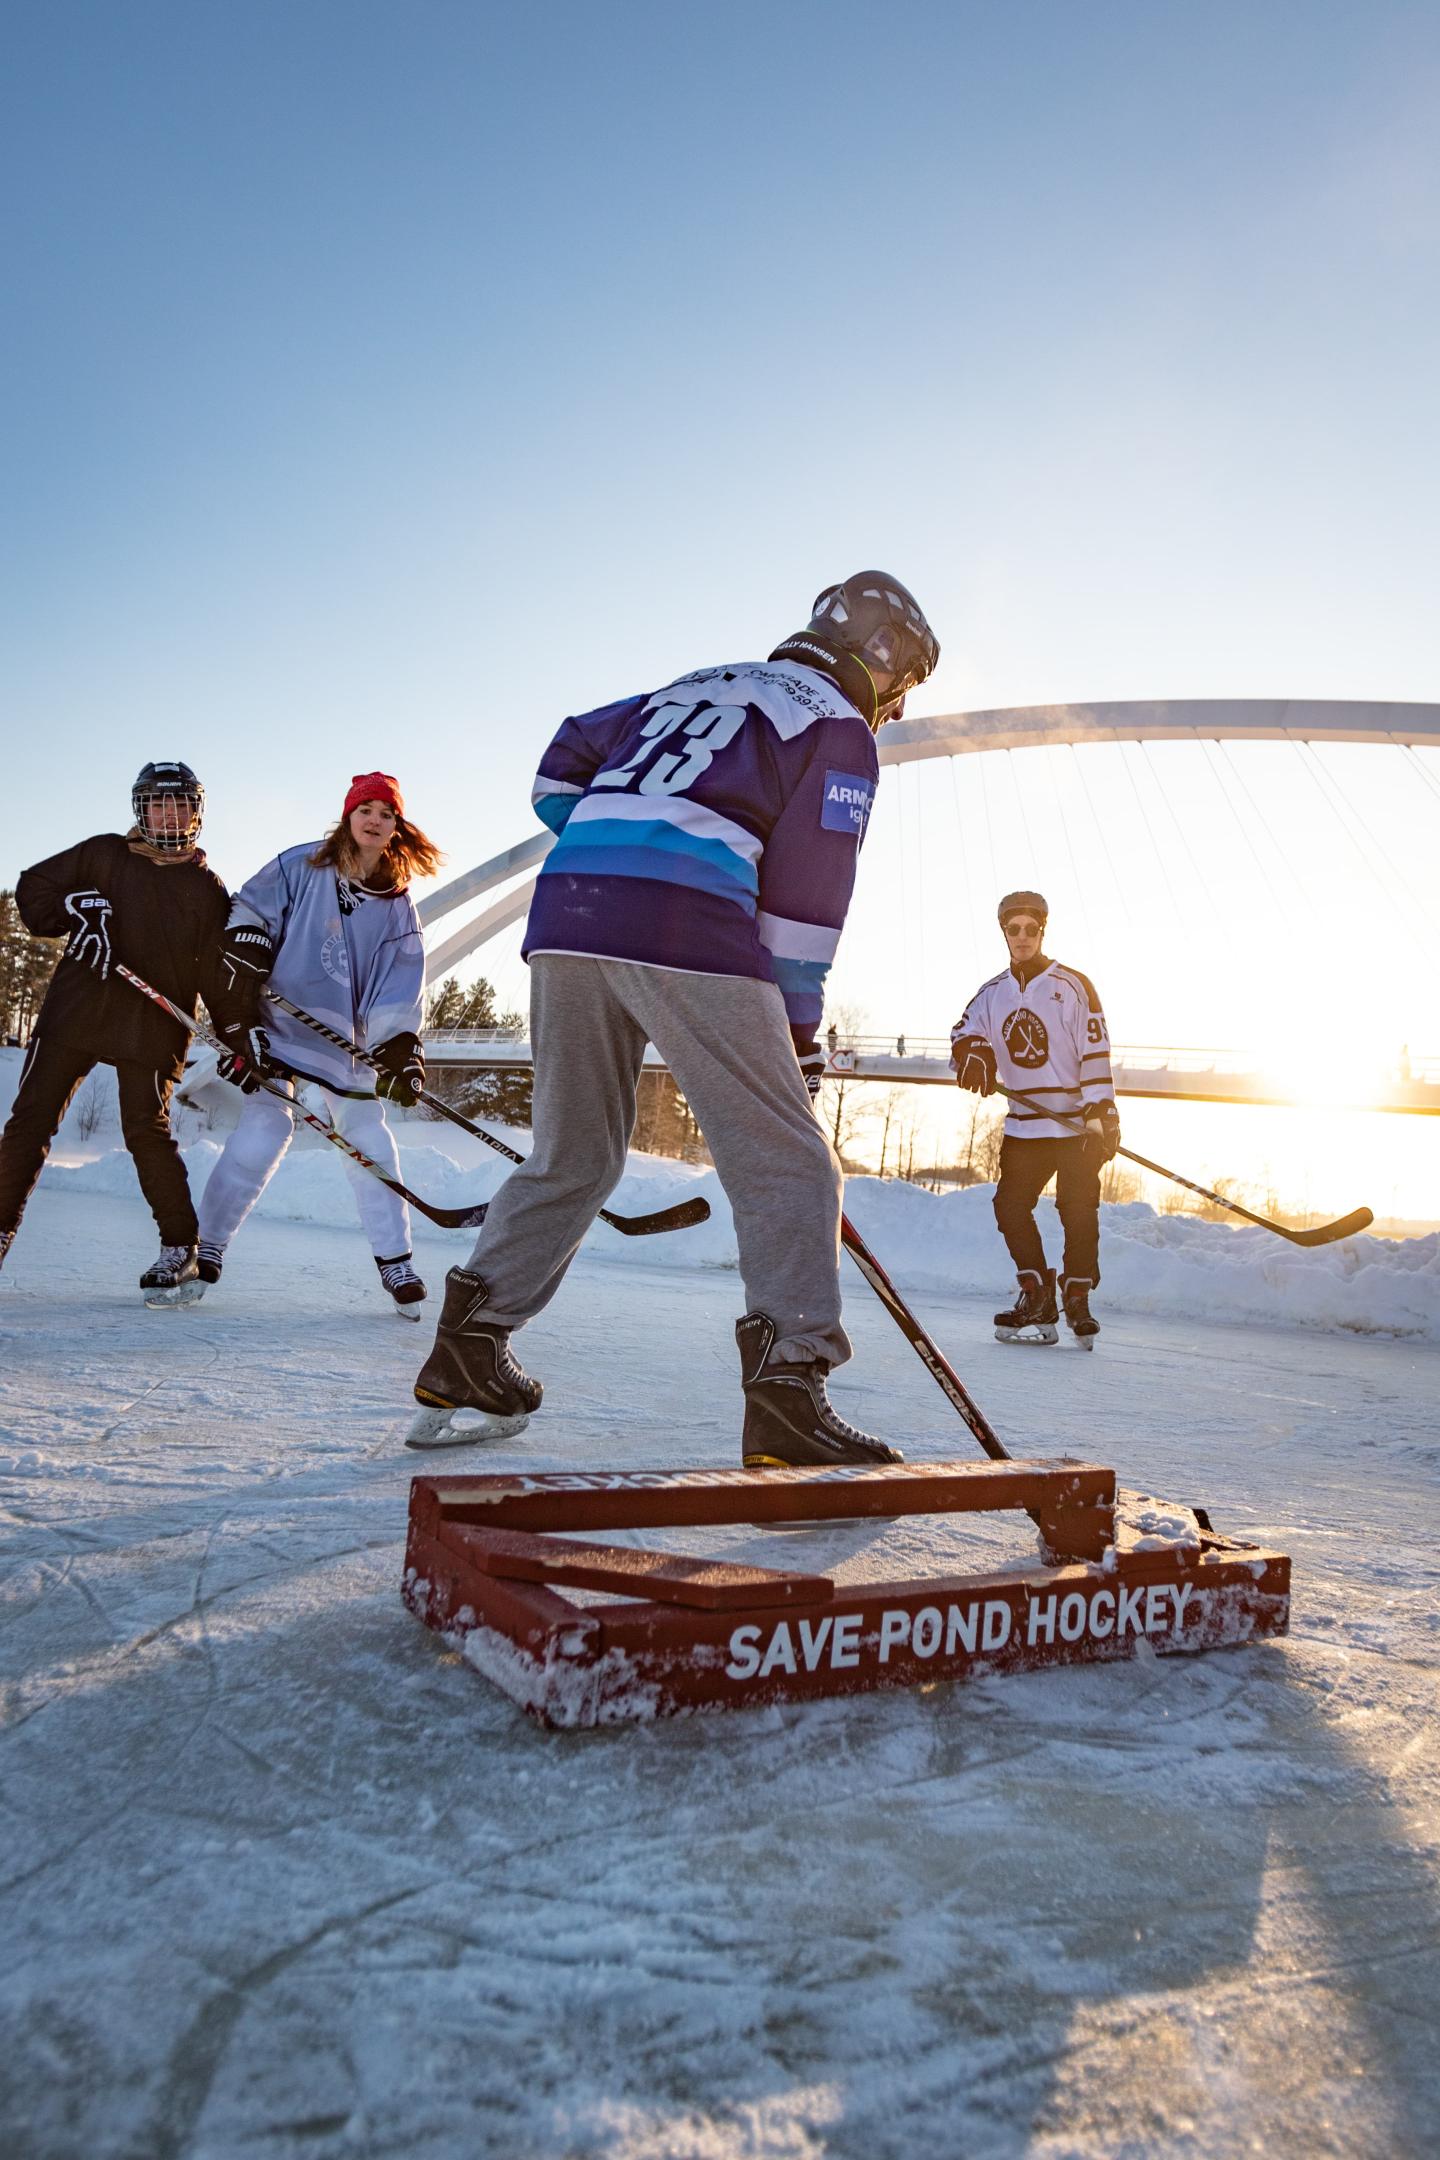 People playing hockey on an outdoor frozen pond with "save pond hockey" on a sign in the foreground